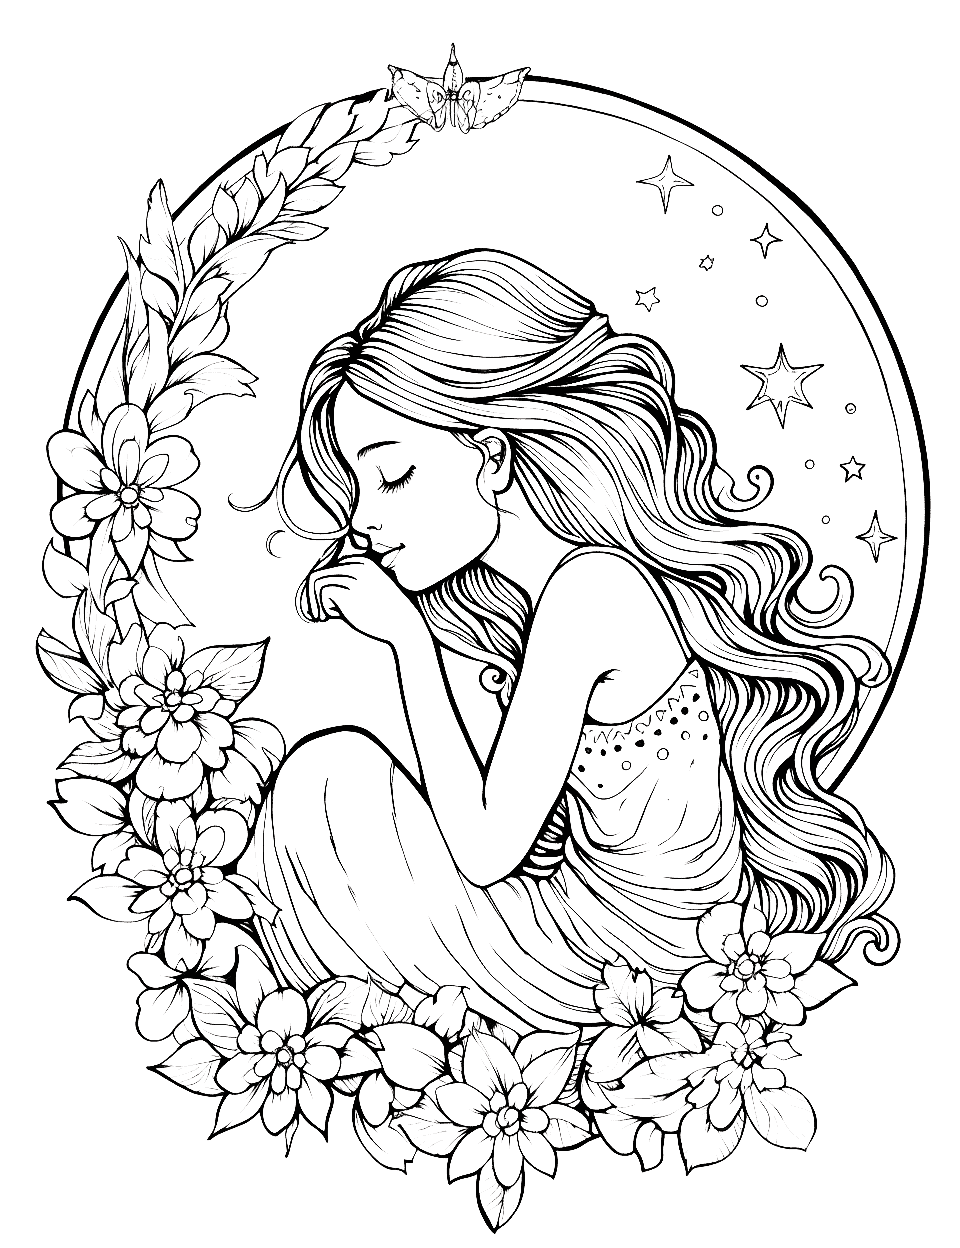 Moonlit Fairy Adult Coloring Page - A fairy sitting on a crescent moon.